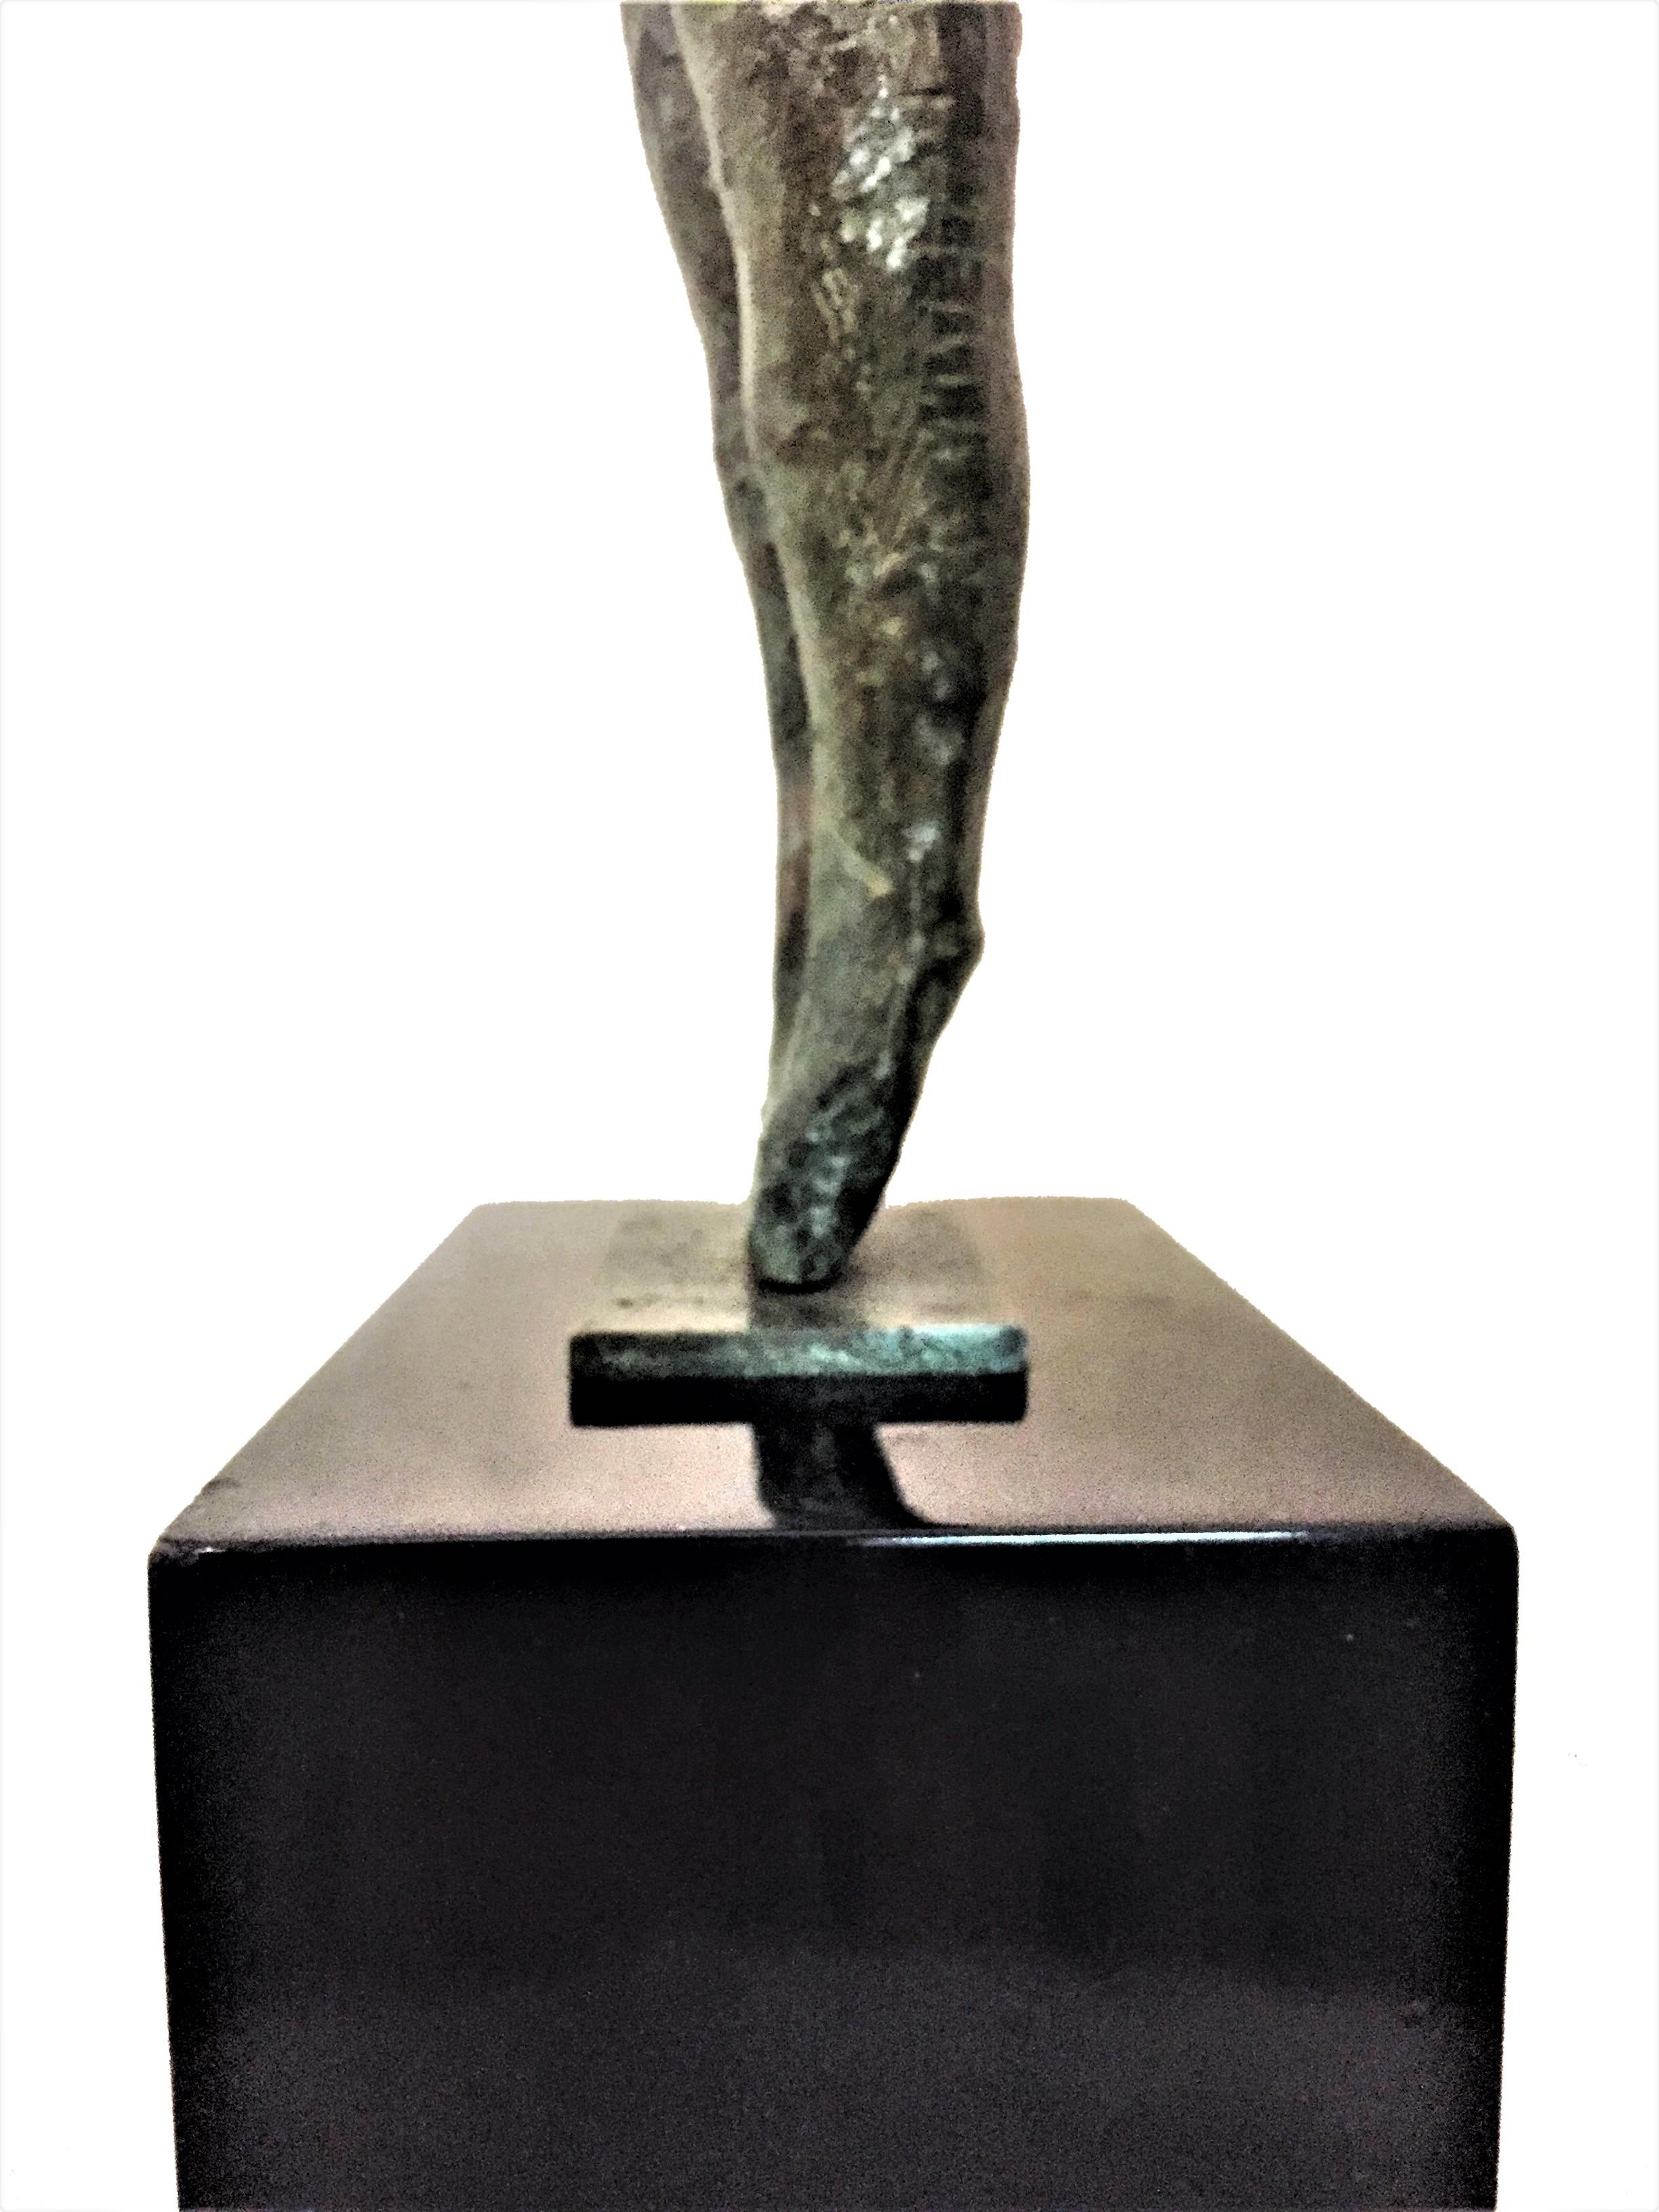 American Shout, Mid-Century Modern Patinated Bronze Sculpture, Signed “Igor 67” For Sale